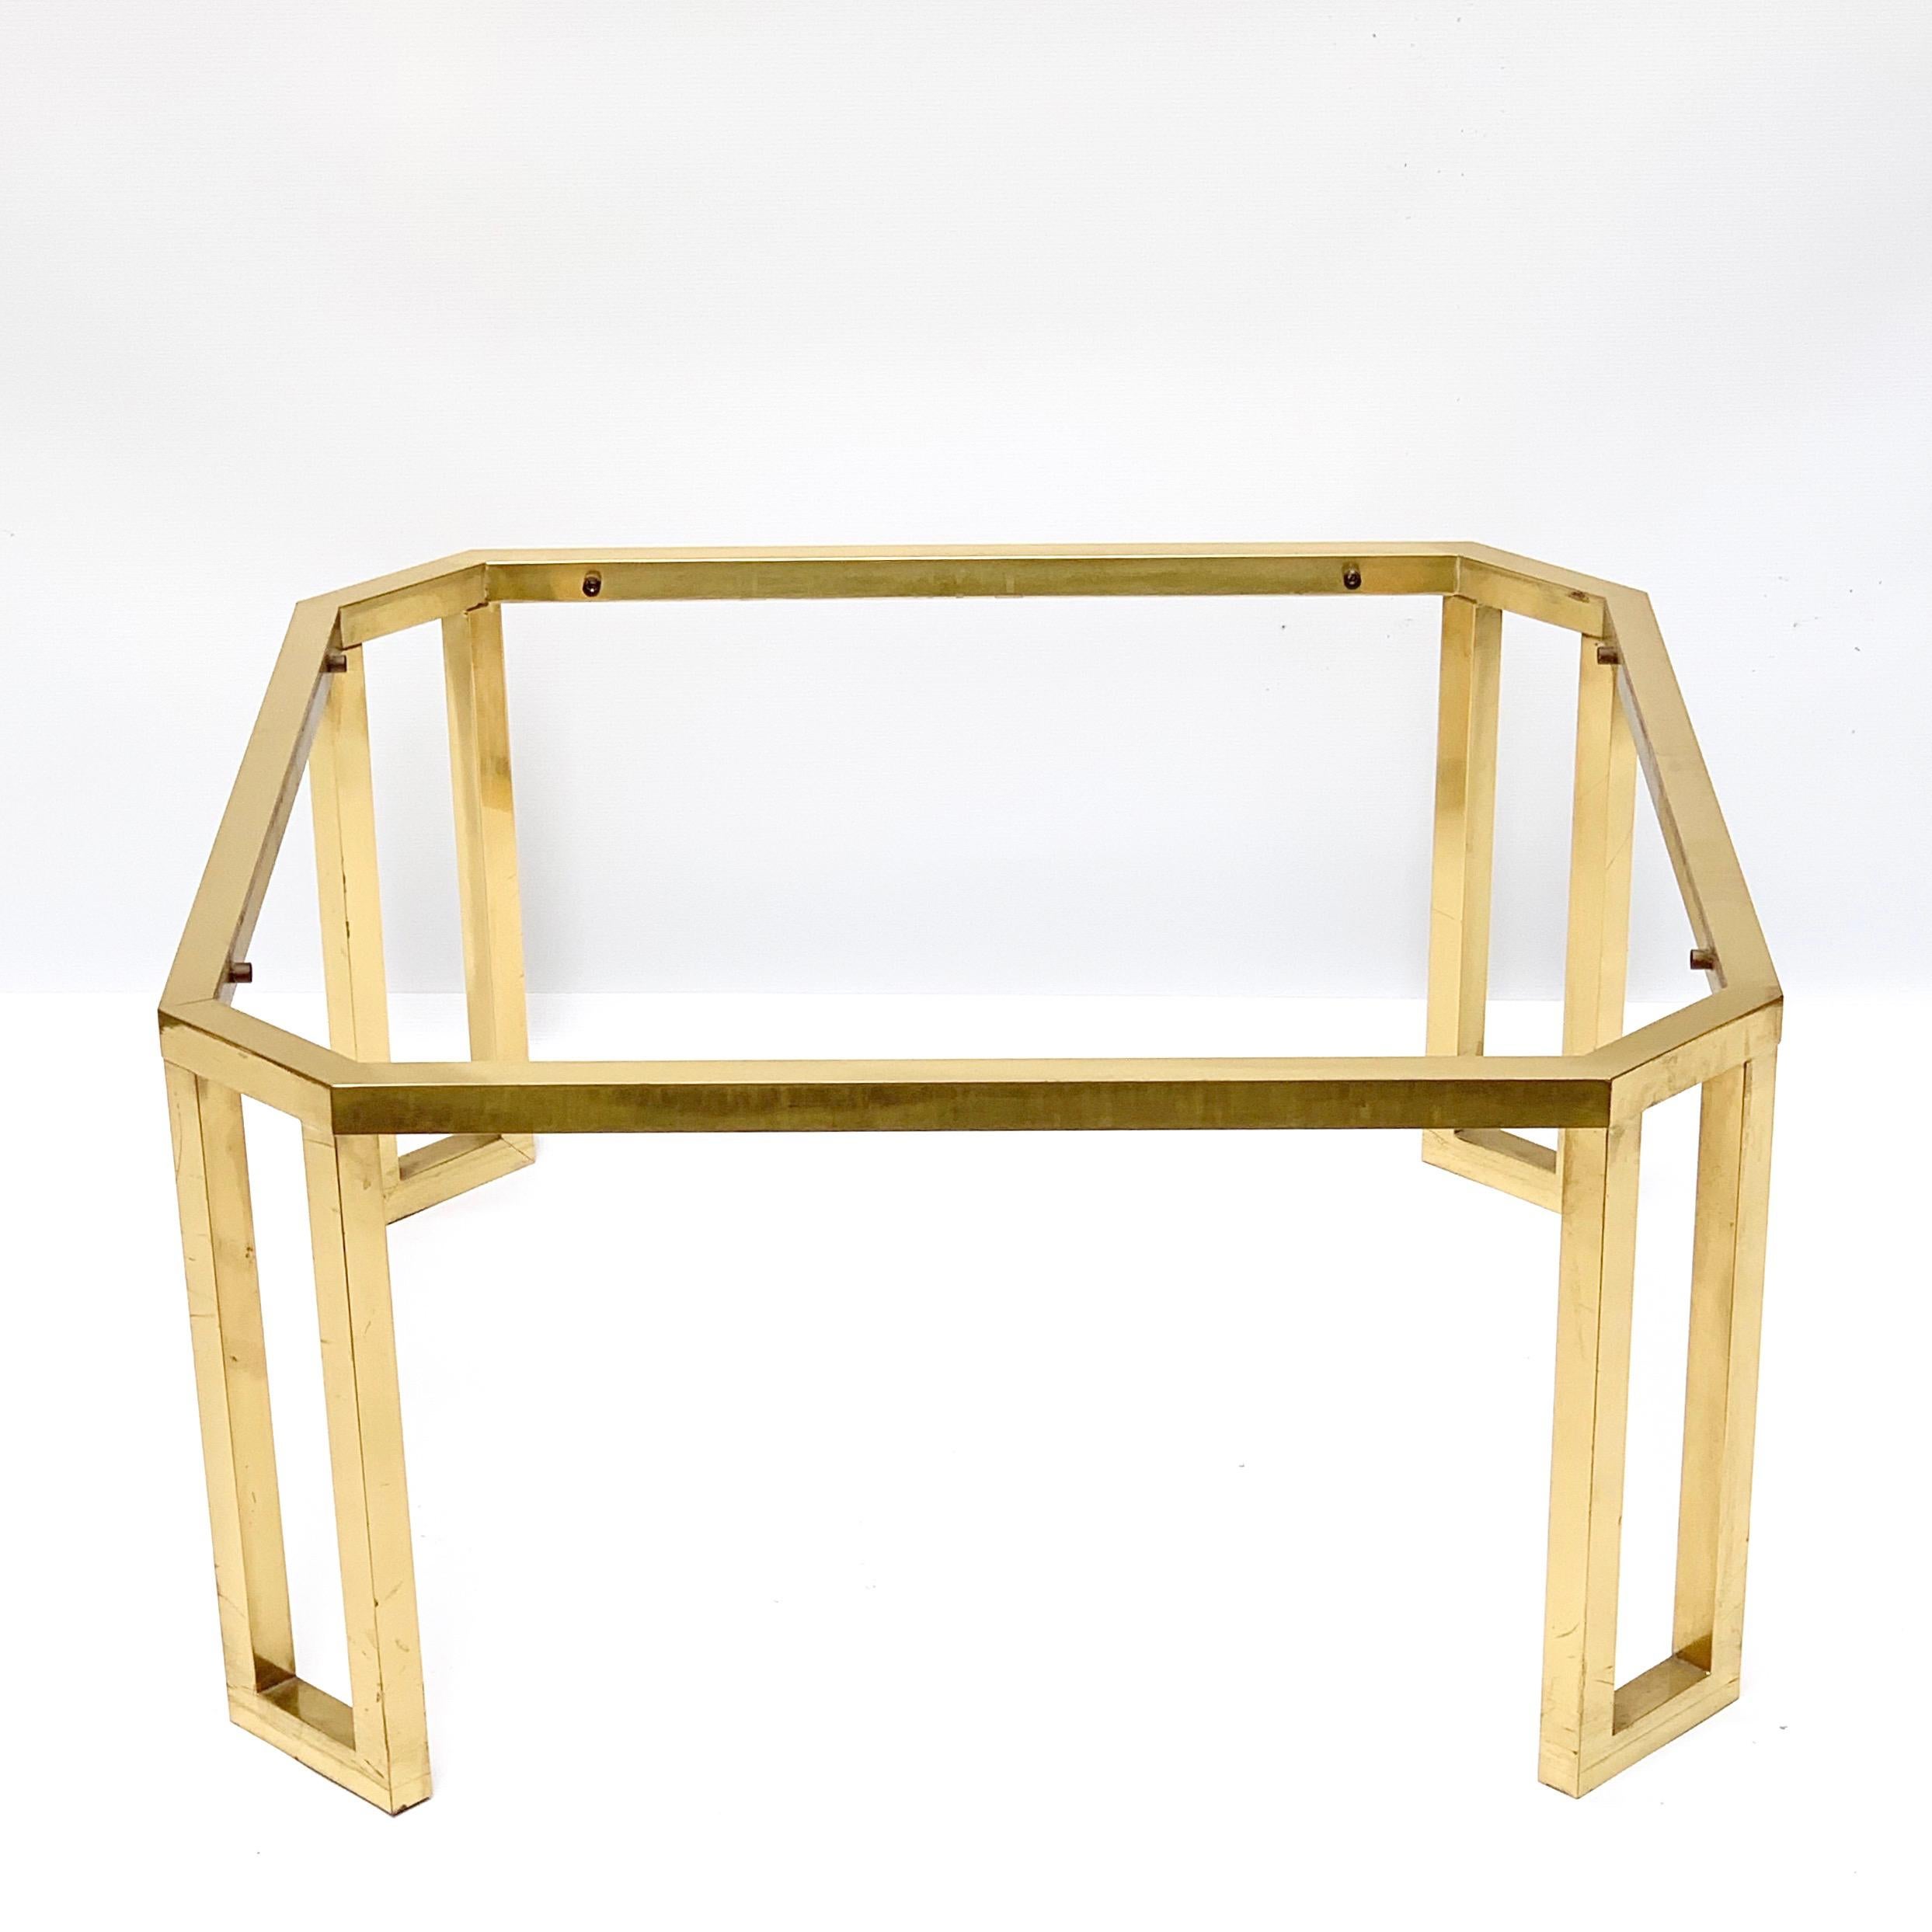 Maison Jansen Octagonal Tables in Brass and Glass, France, 1970s Coffee Tables For Sale 3